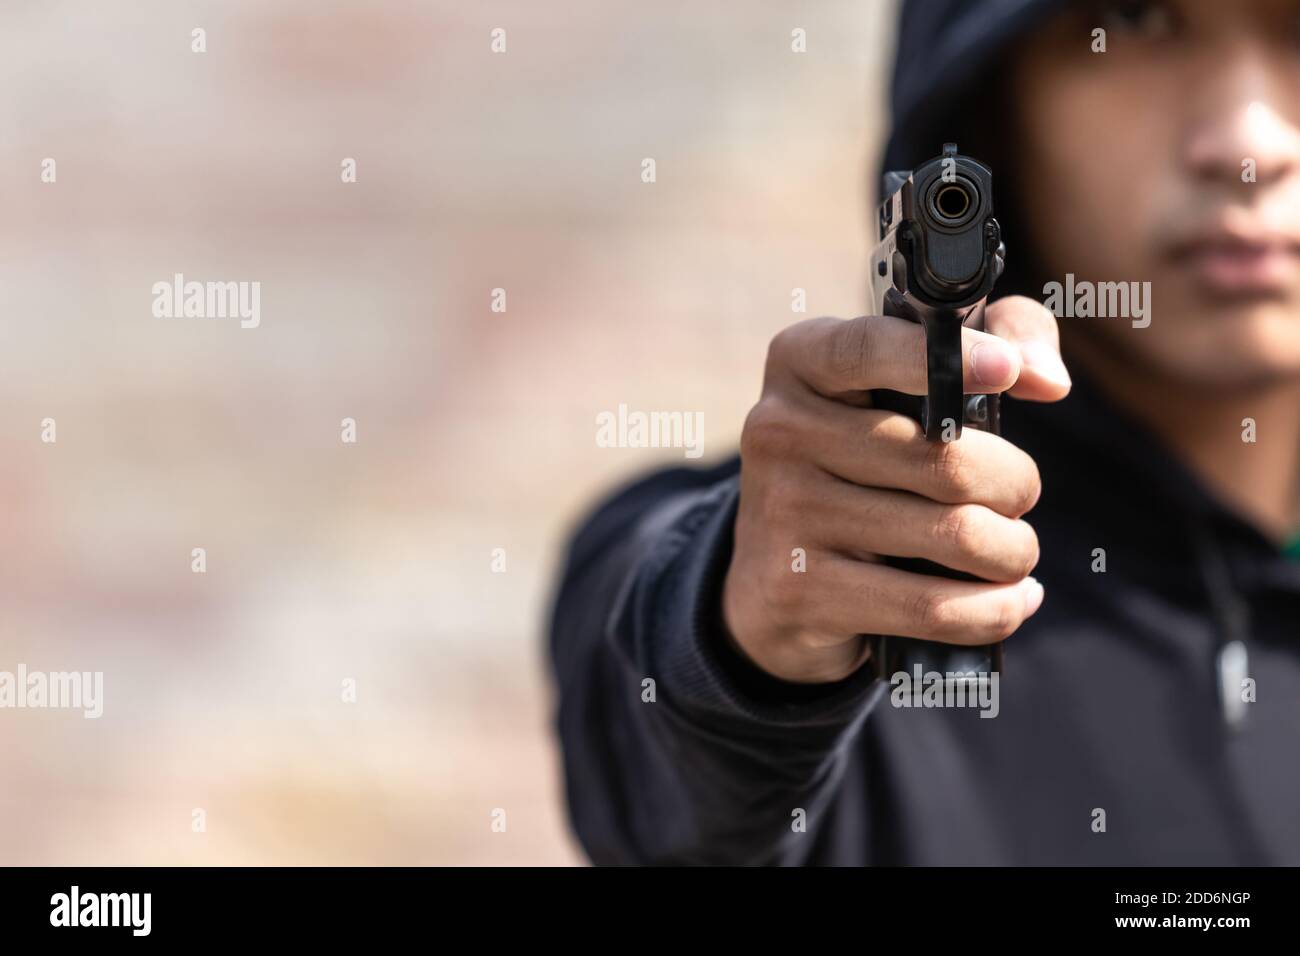 The gangster aimed a gun at the camera. A thief pointing a gun at the target. selective focus on the front gun, Blurred focus. Stock Photo